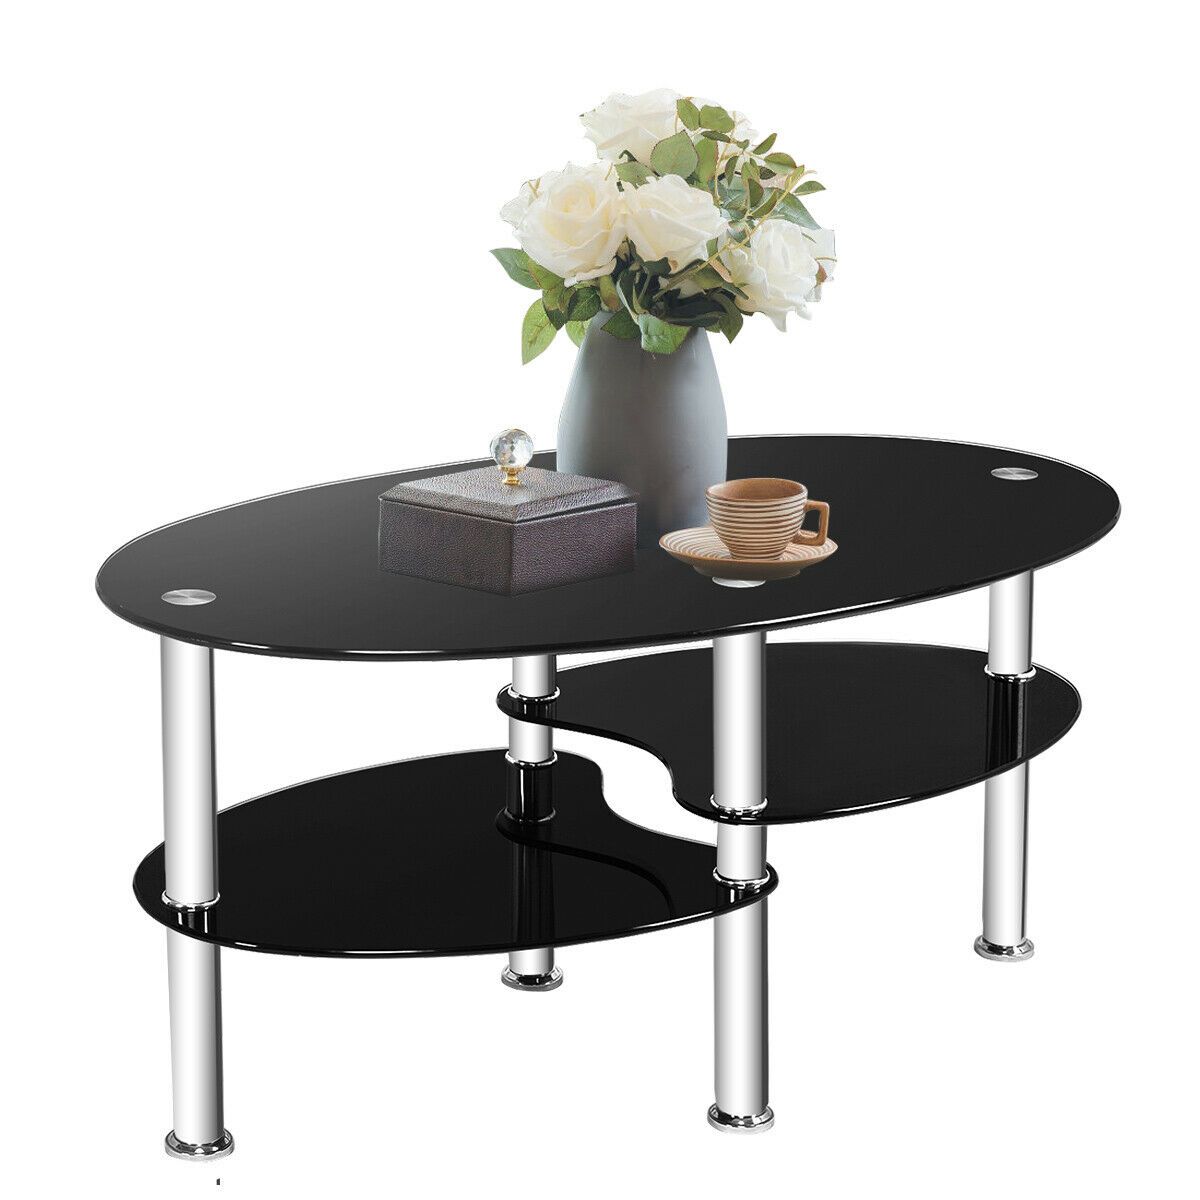 Tempered Glass Oval Side Coffee Table Shelf Chrome Base Living Room Pertaining To Tempered Glass Oval Side Tables (View 3 of 20)